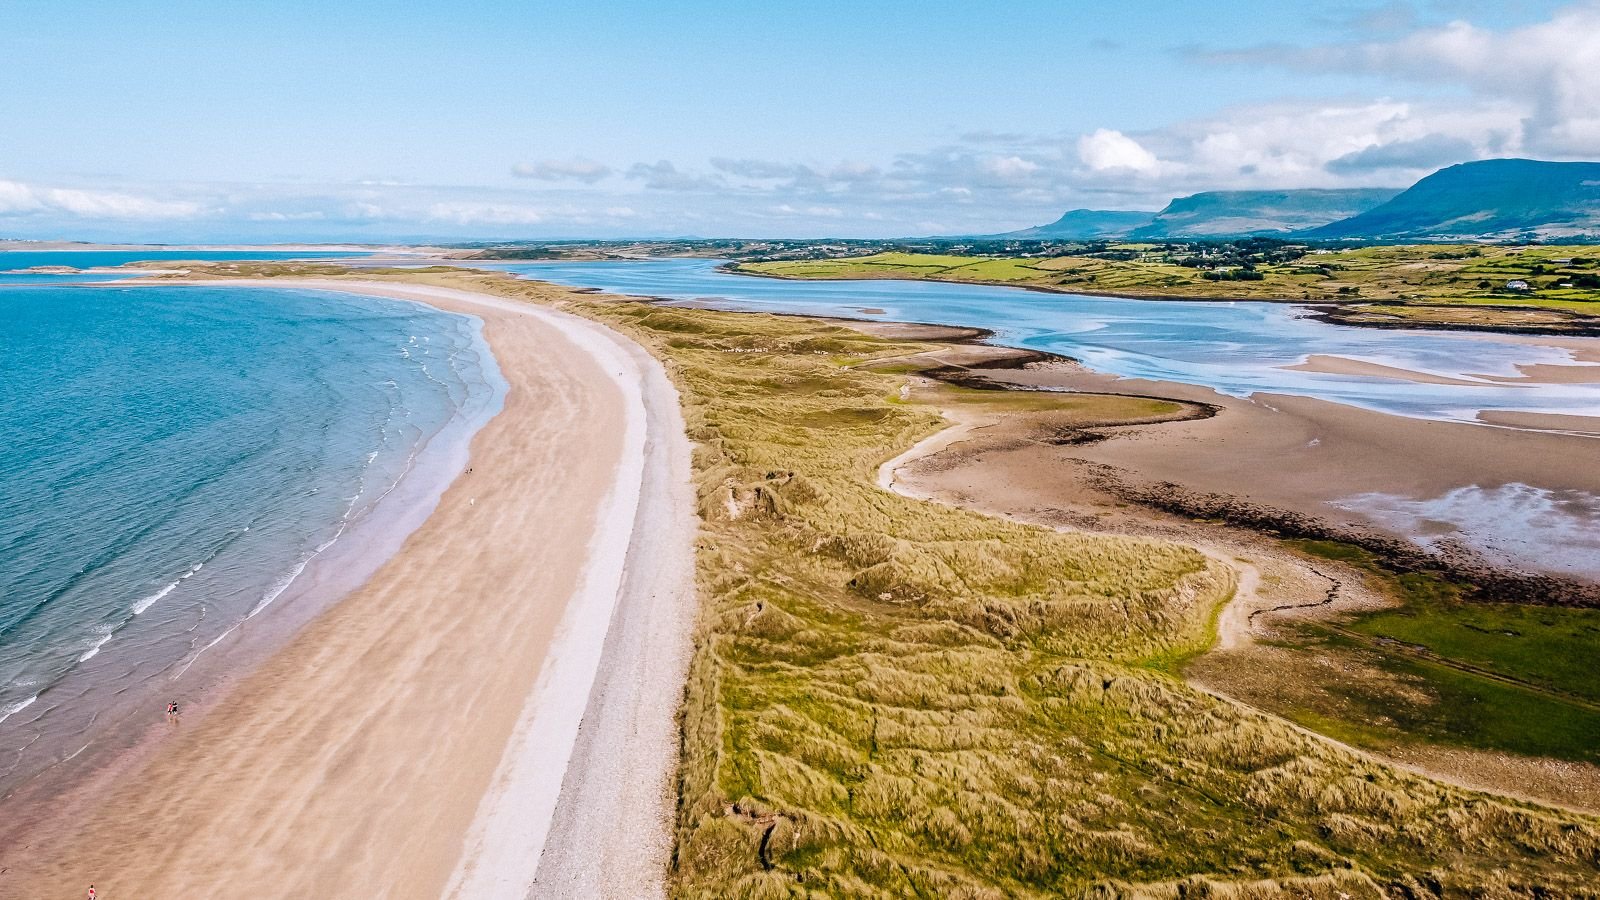 drone image of a sand bar beach with mountains in the background